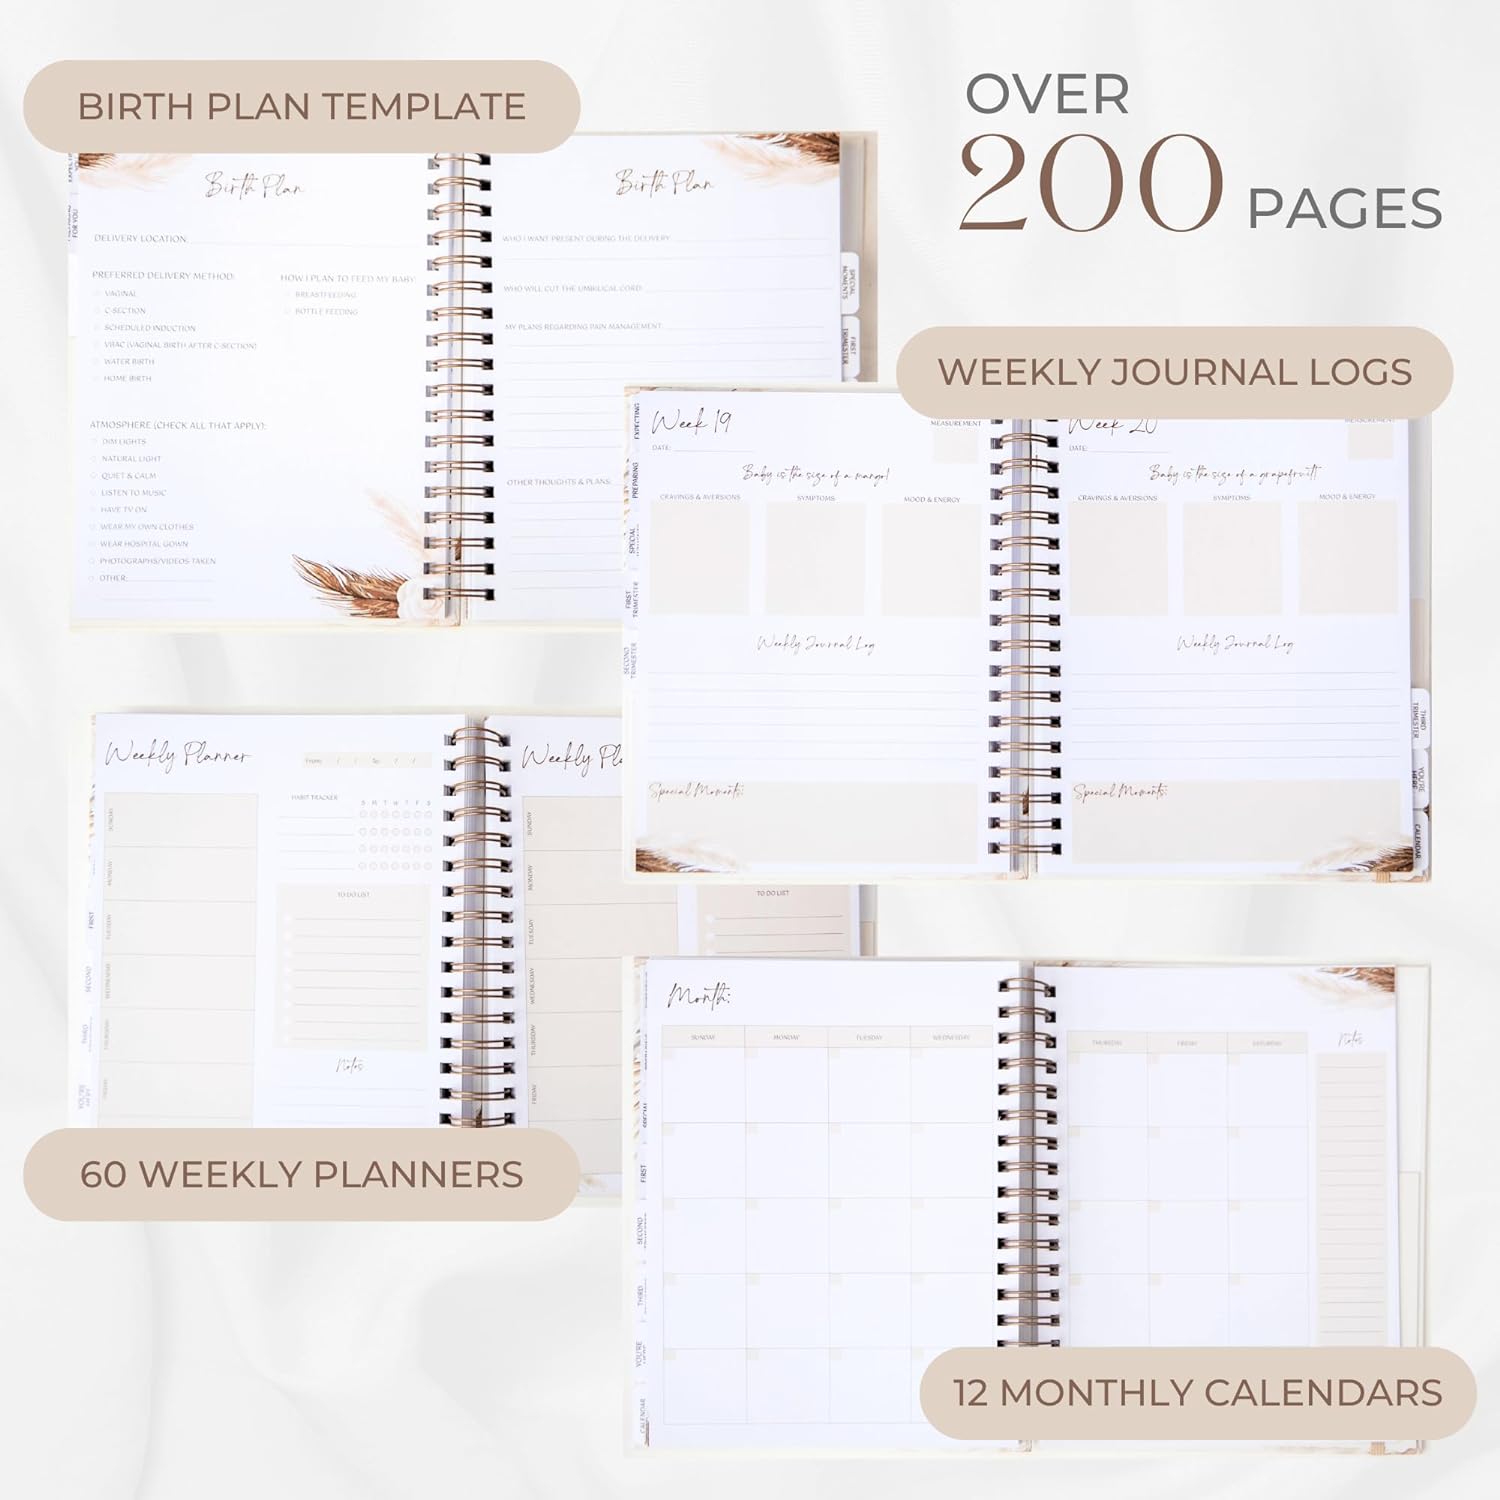 Pregnancy Journal - Baby Journal with over 200 pages Book    - Chickie Collective